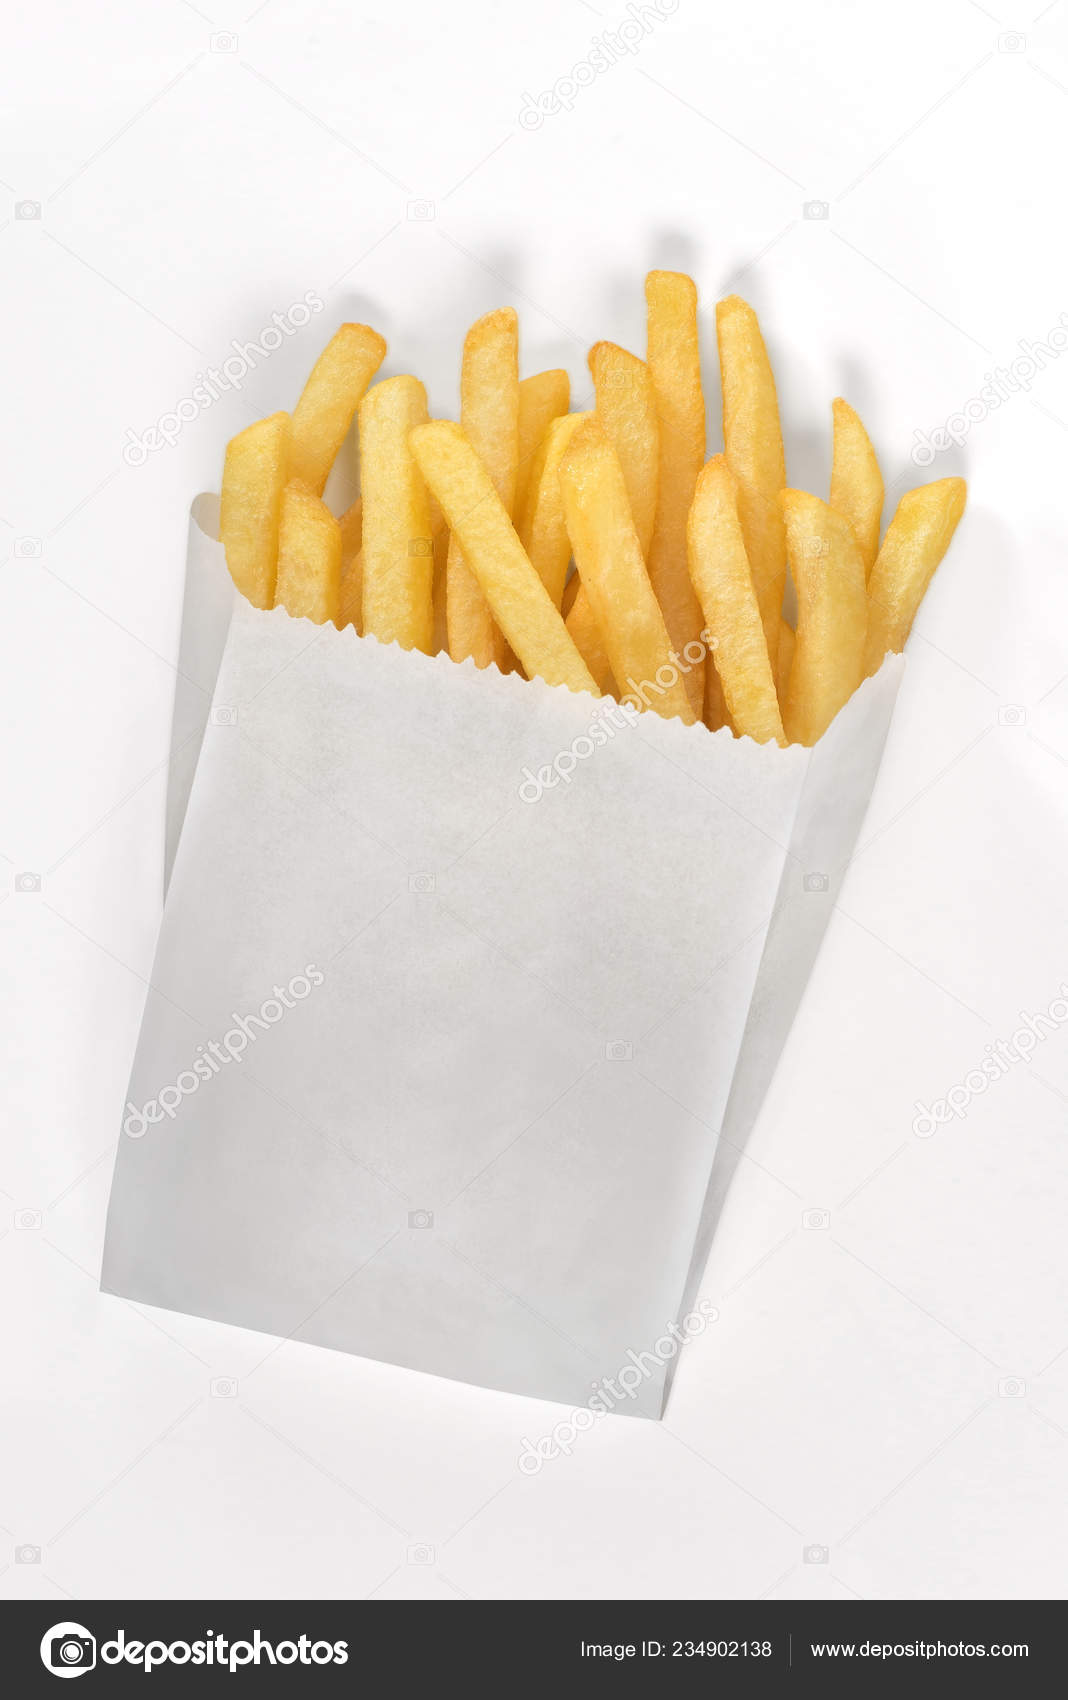 French Fries White Paper Bag Stock Photo by ©MKPK 234902018